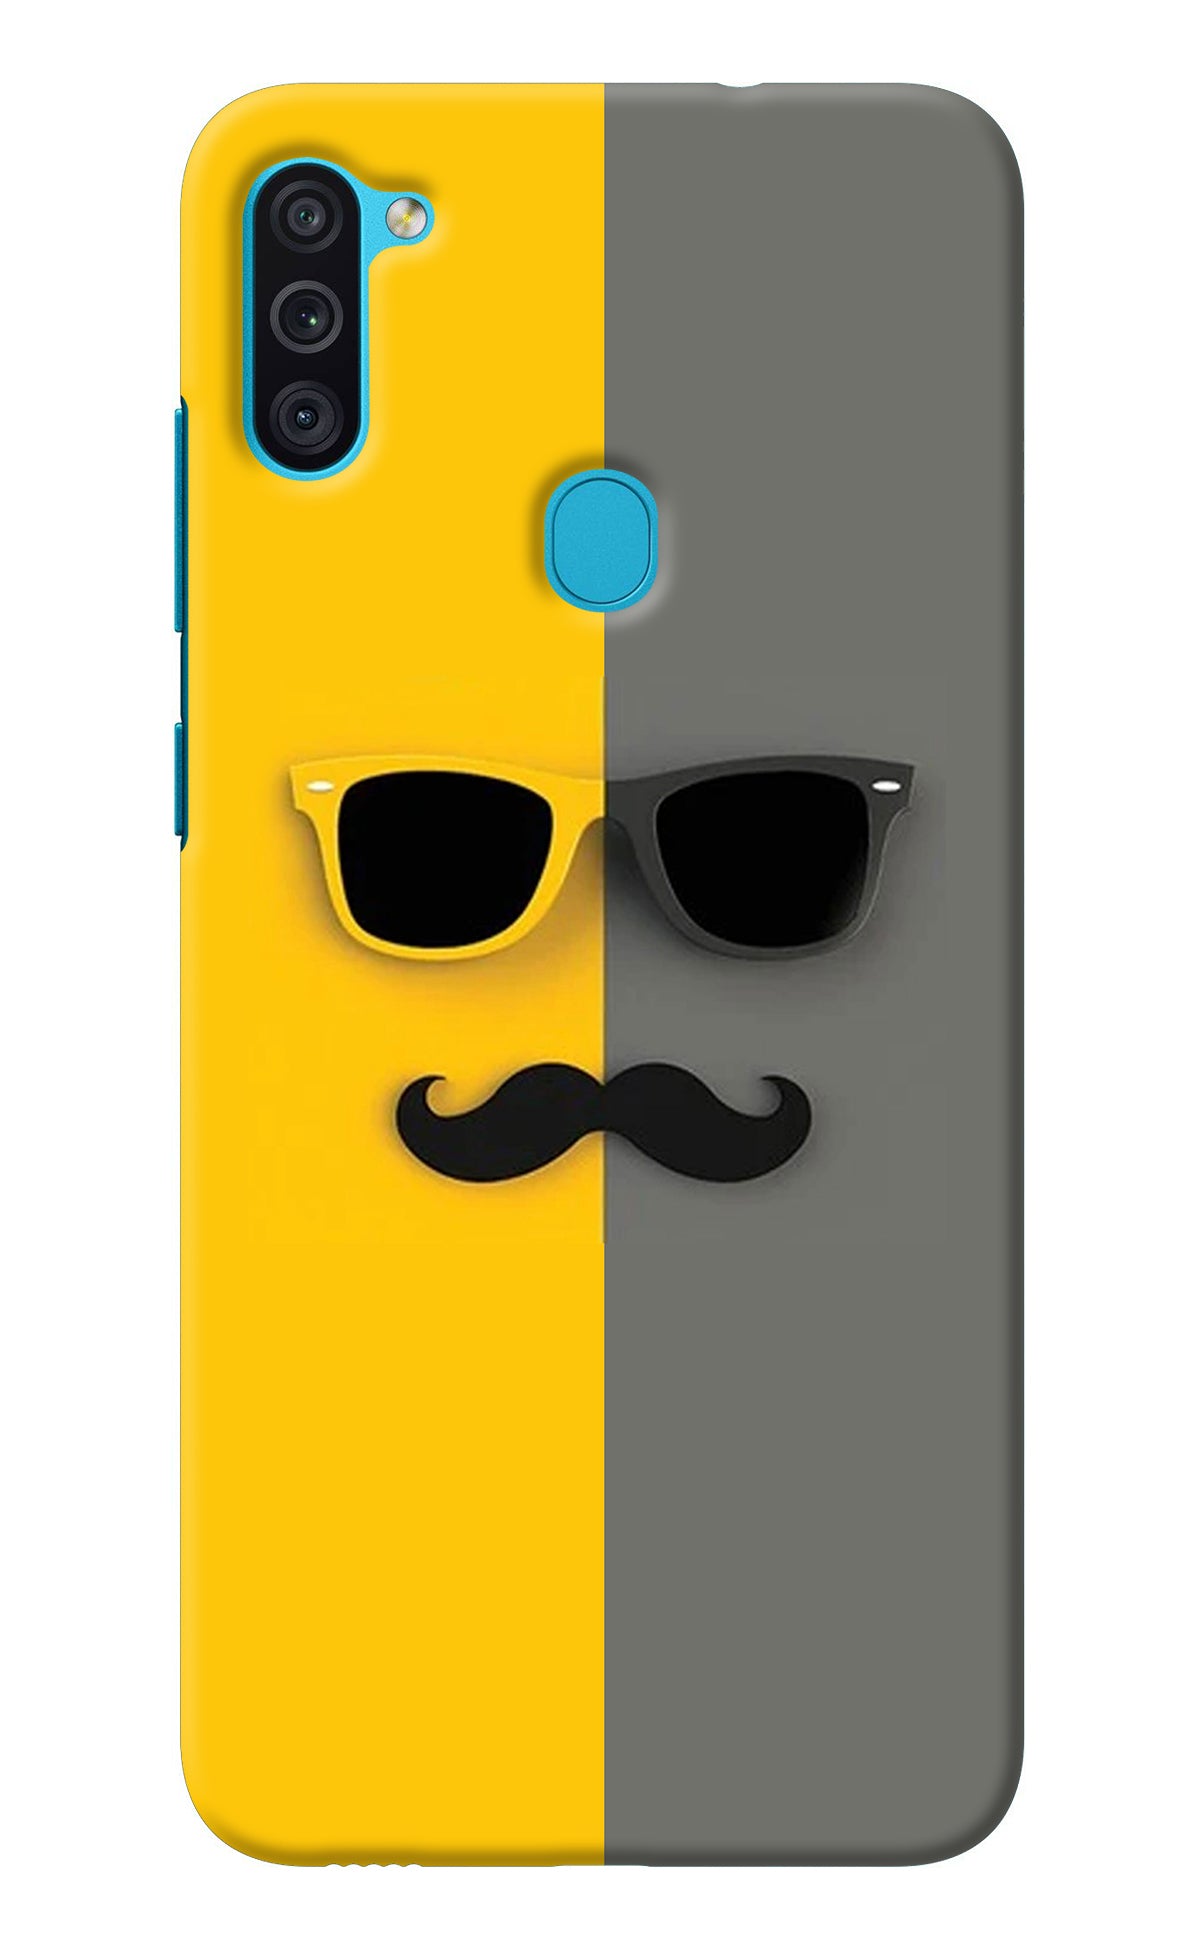 Sunglasses with Mustache Samsung M11 Back Cover